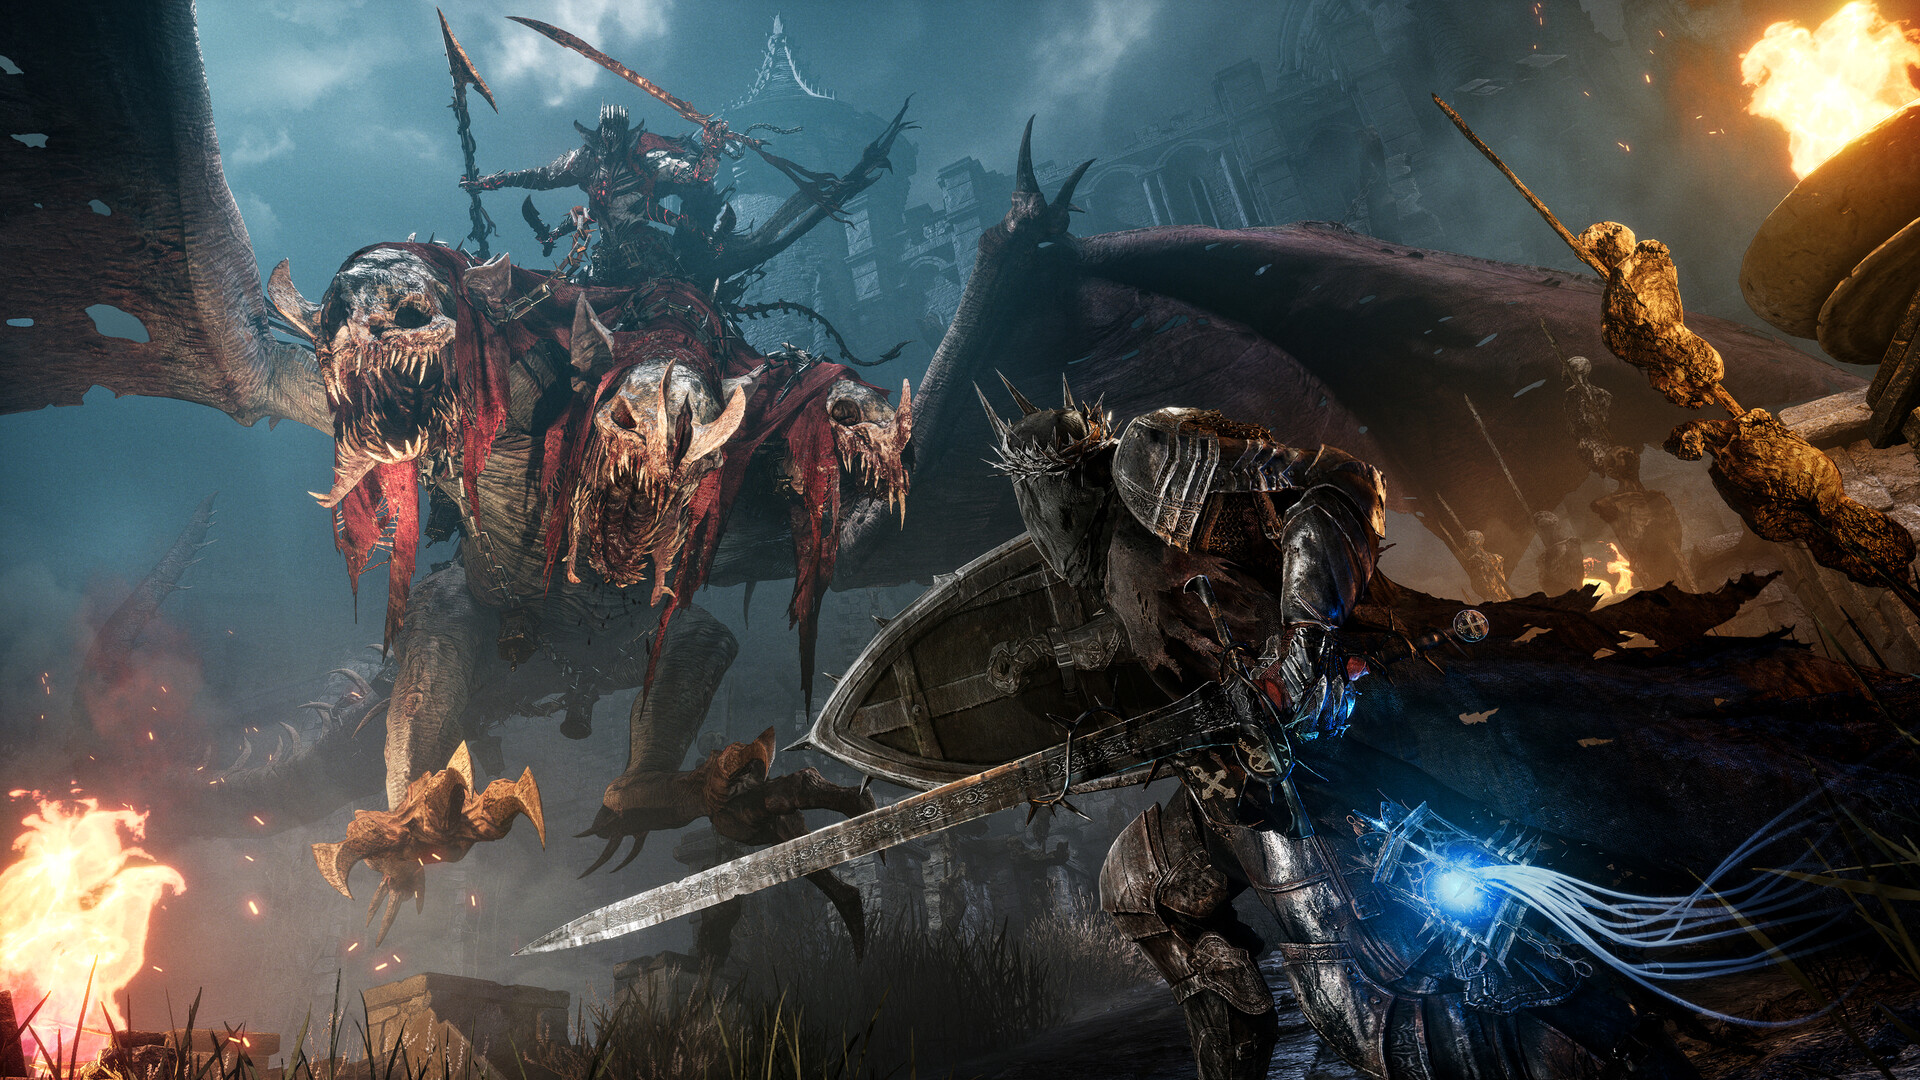 Lords of the Fallen - Official Launch Trailer 